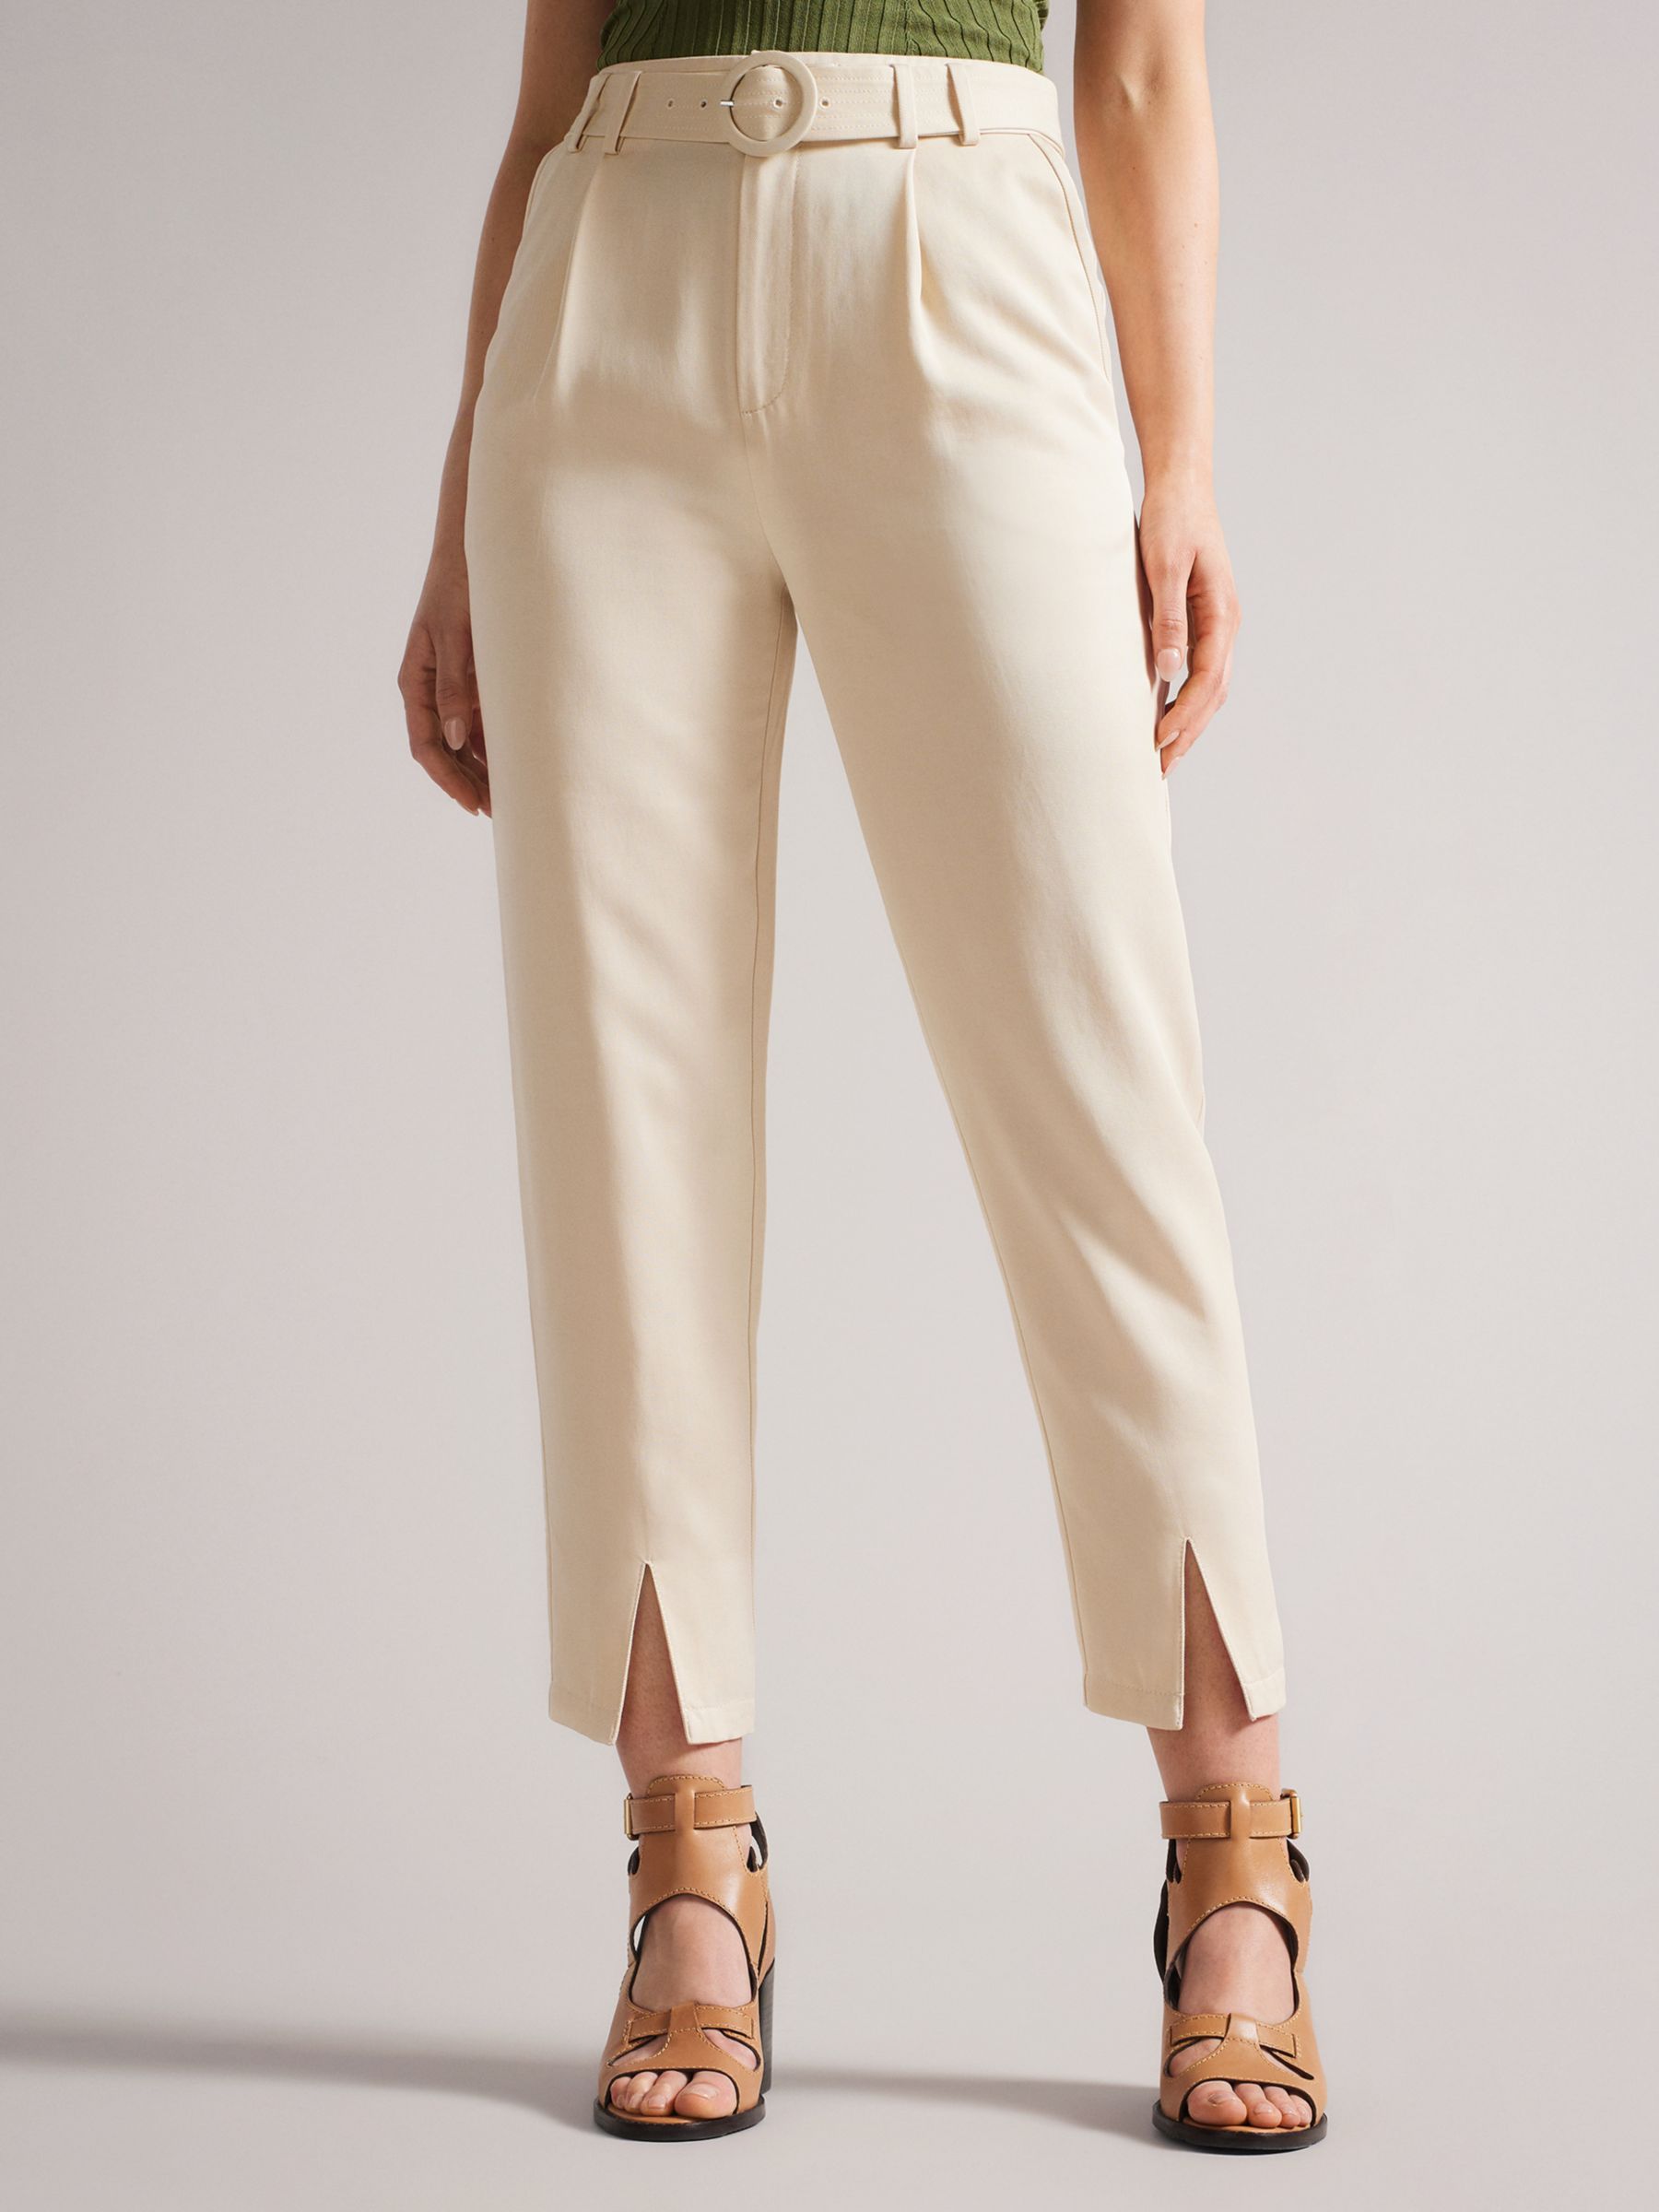 Ted Baker Ninette Belted Trousers, Ivory